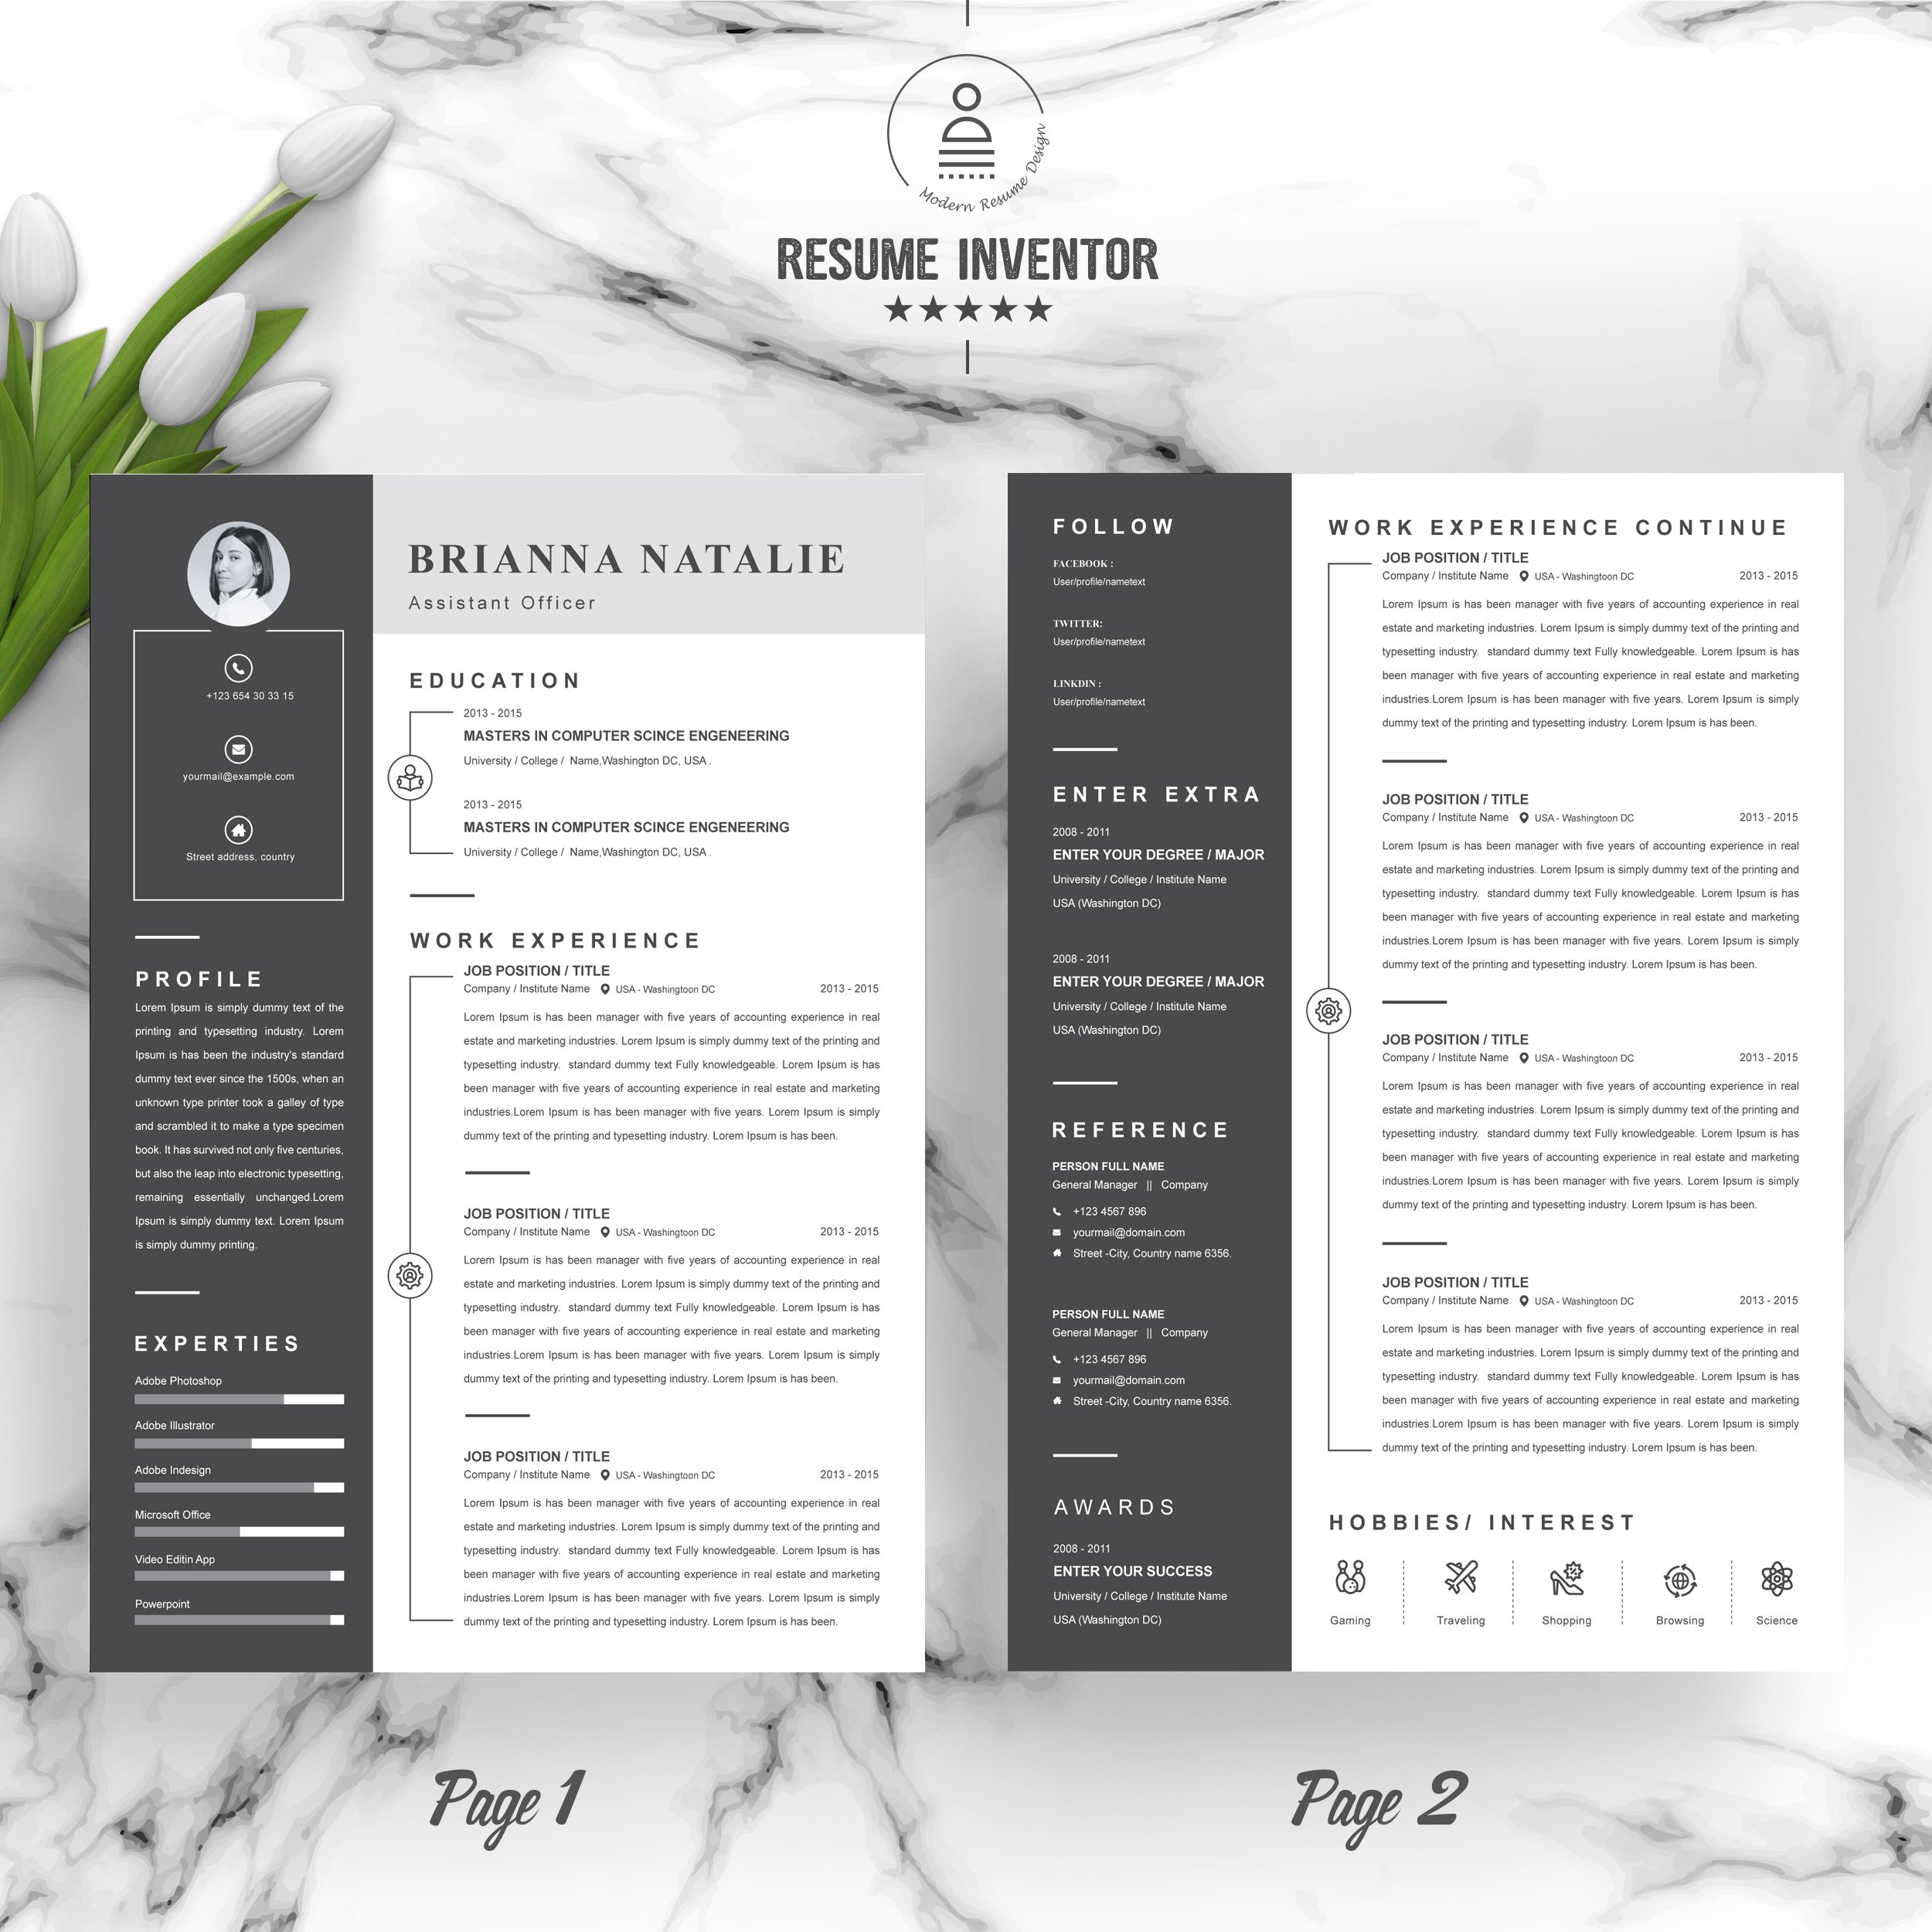 Assistant Officer Resume Template preview image.